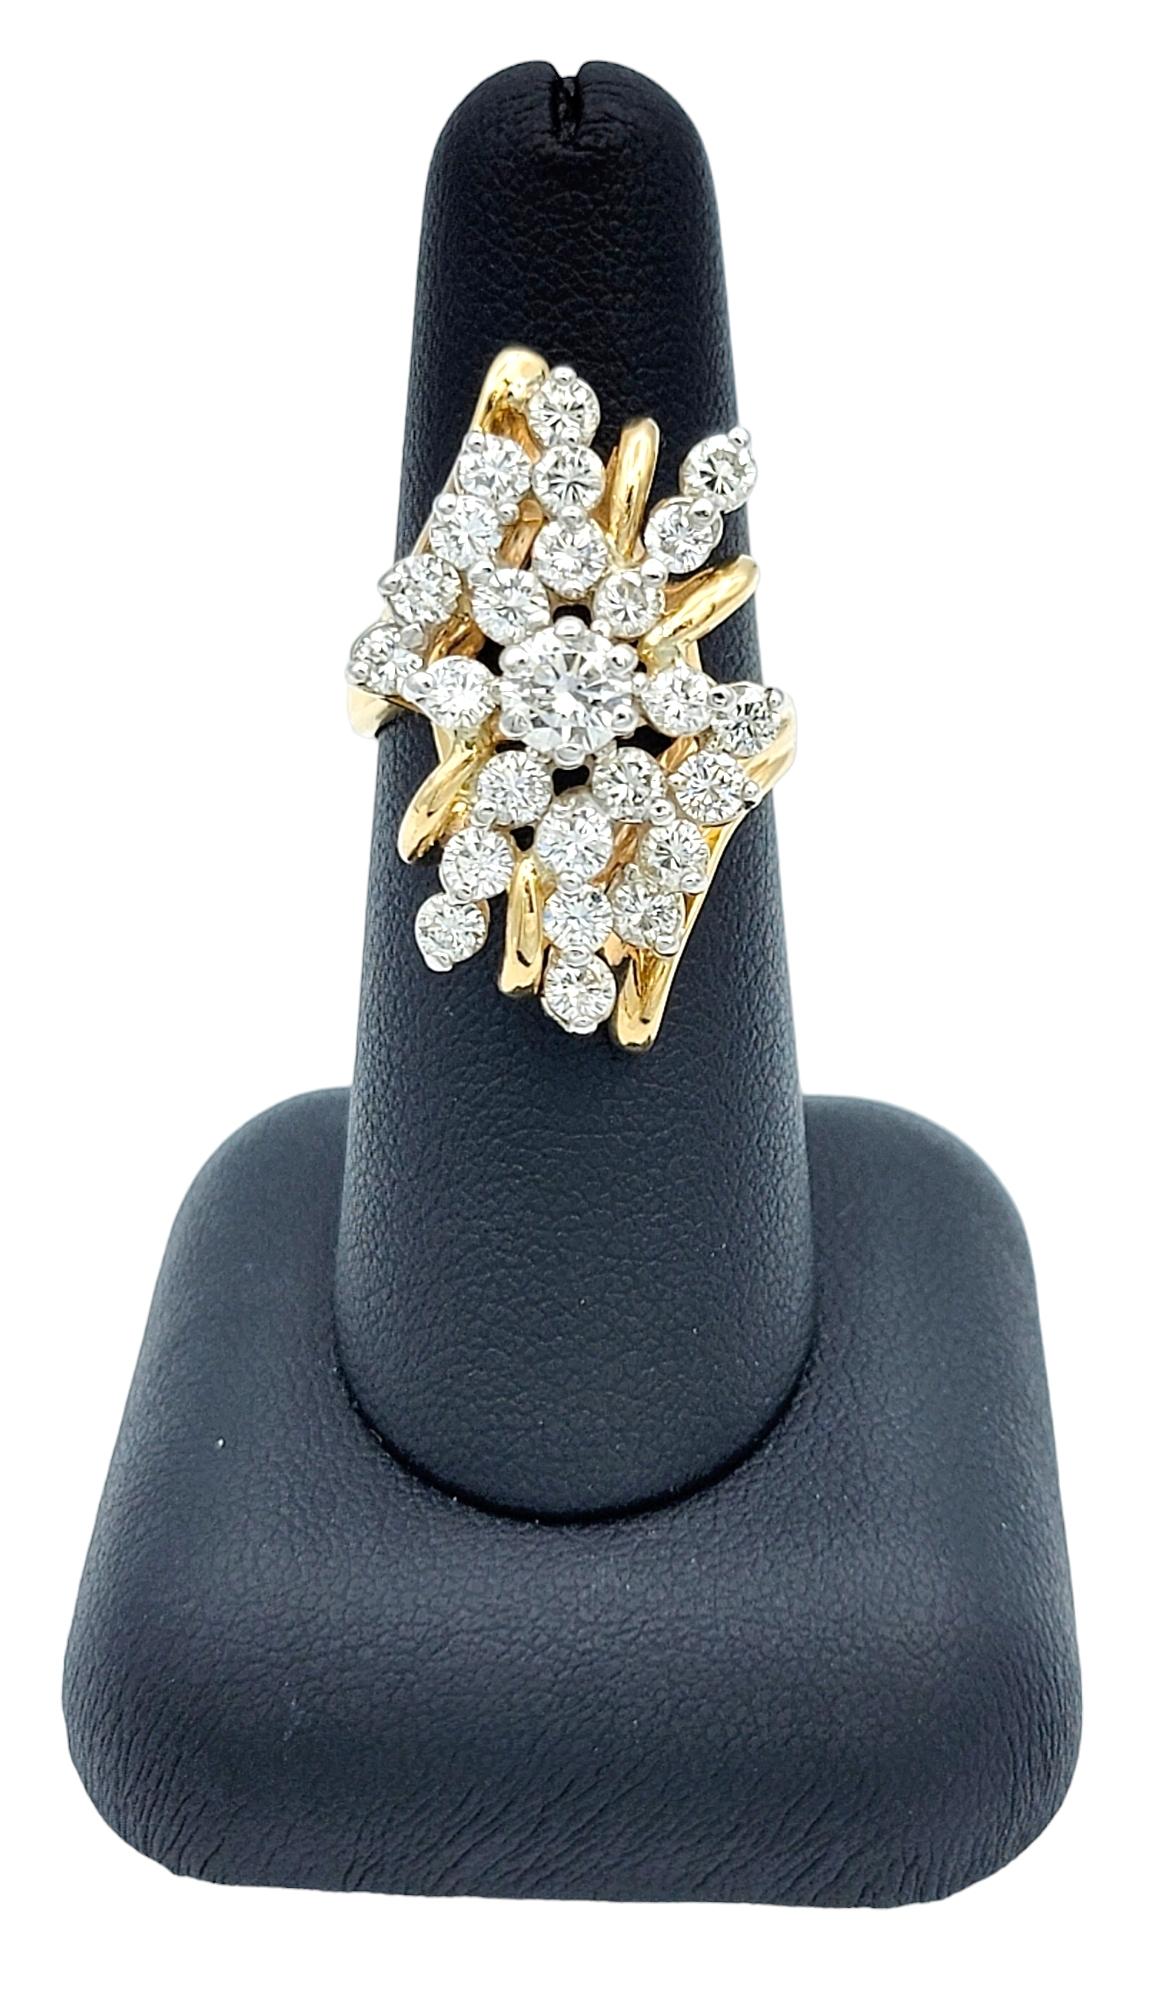 3.01 Carat Total Round Diamond Elongated Cluster Ring in 14 Karat Yellow Gold For Sale 3